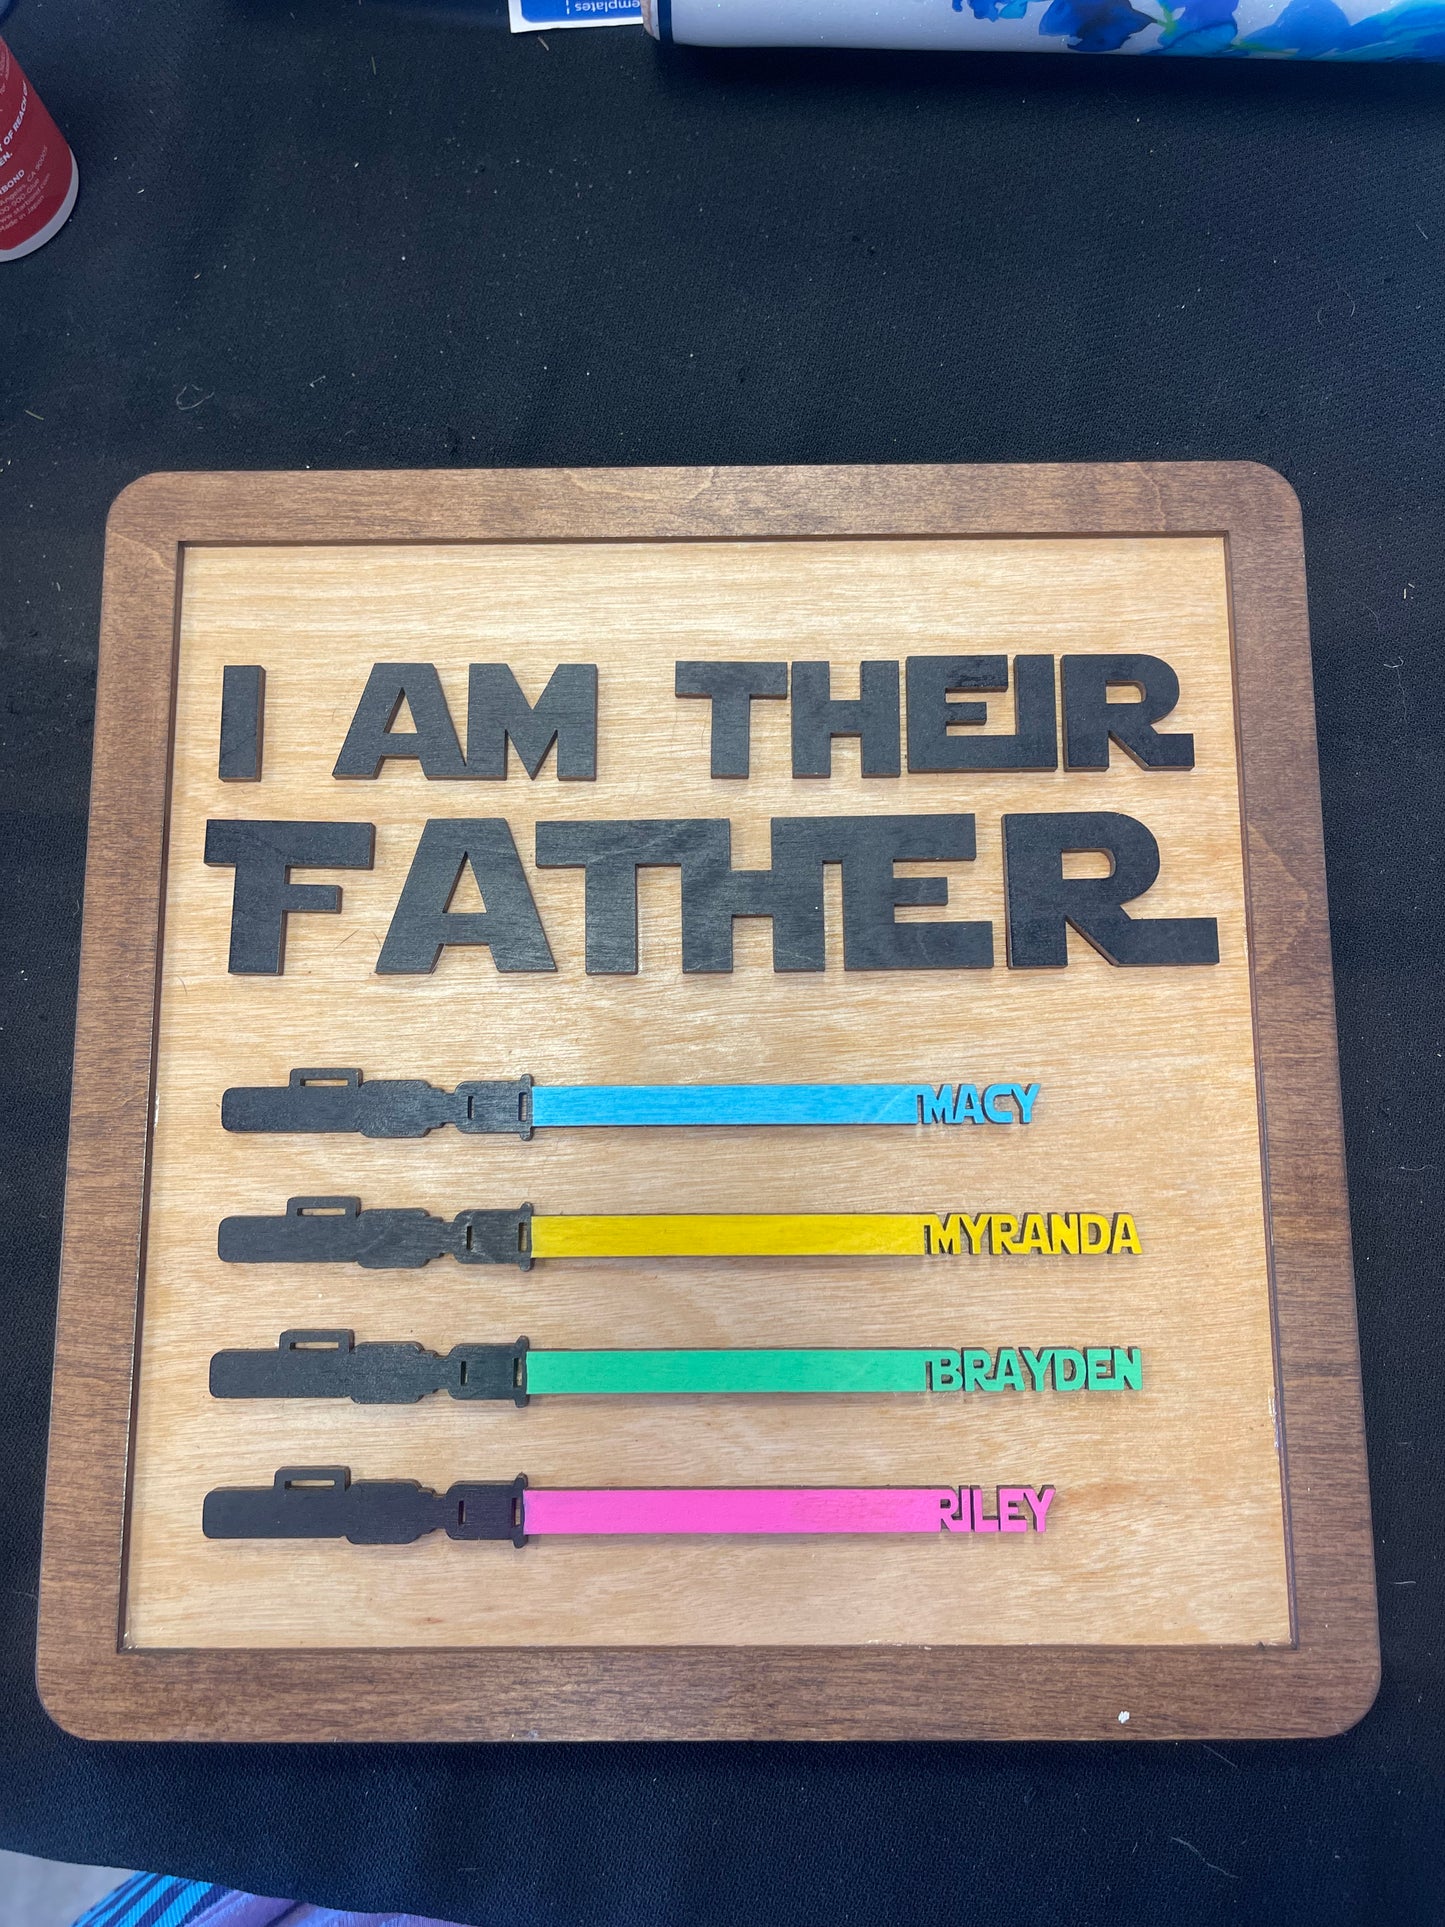 Father's Day Star Wars sign - Custom